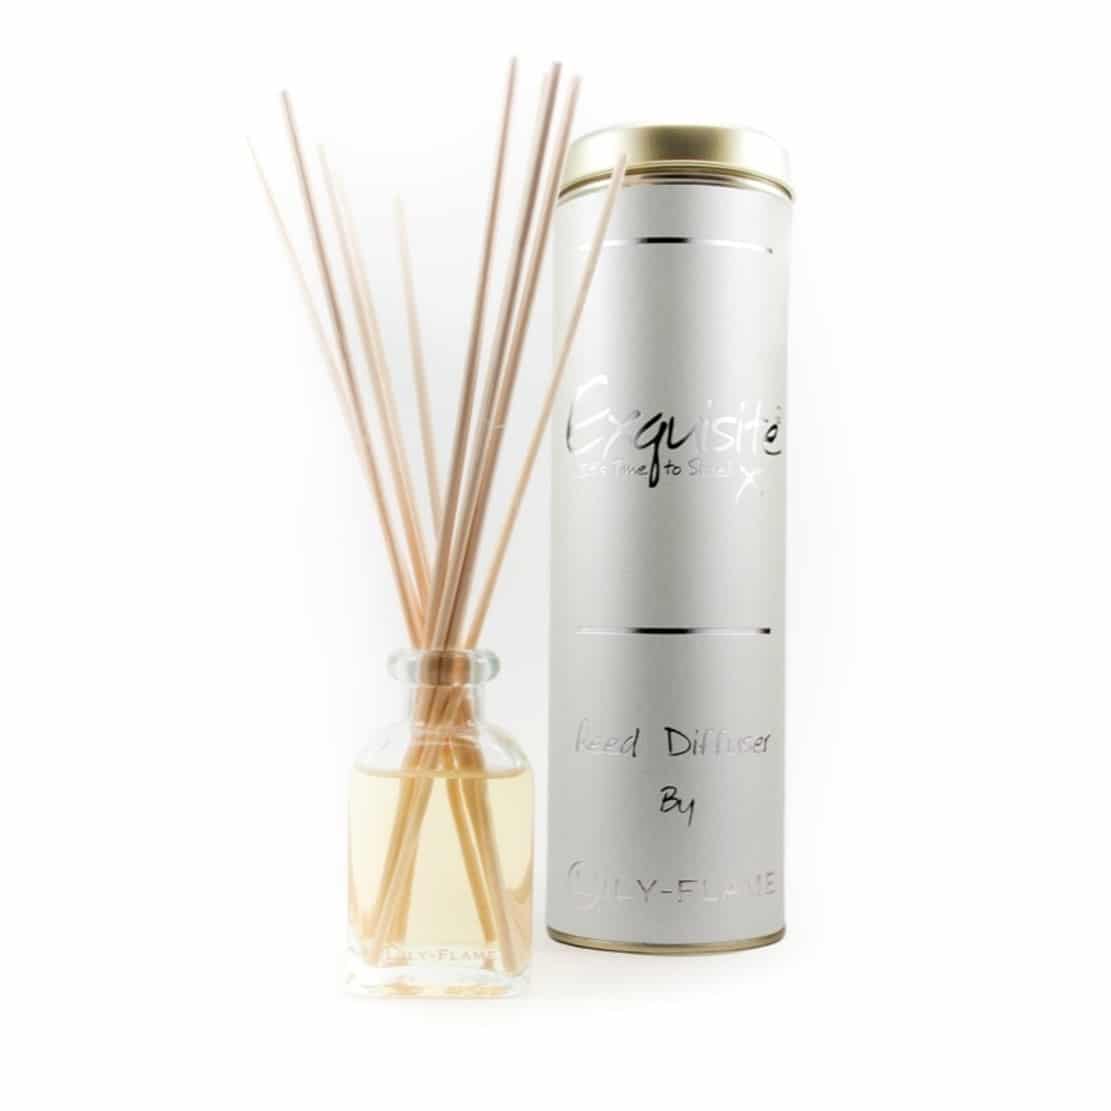 Lily Flame Exquisite Reed Diffuser